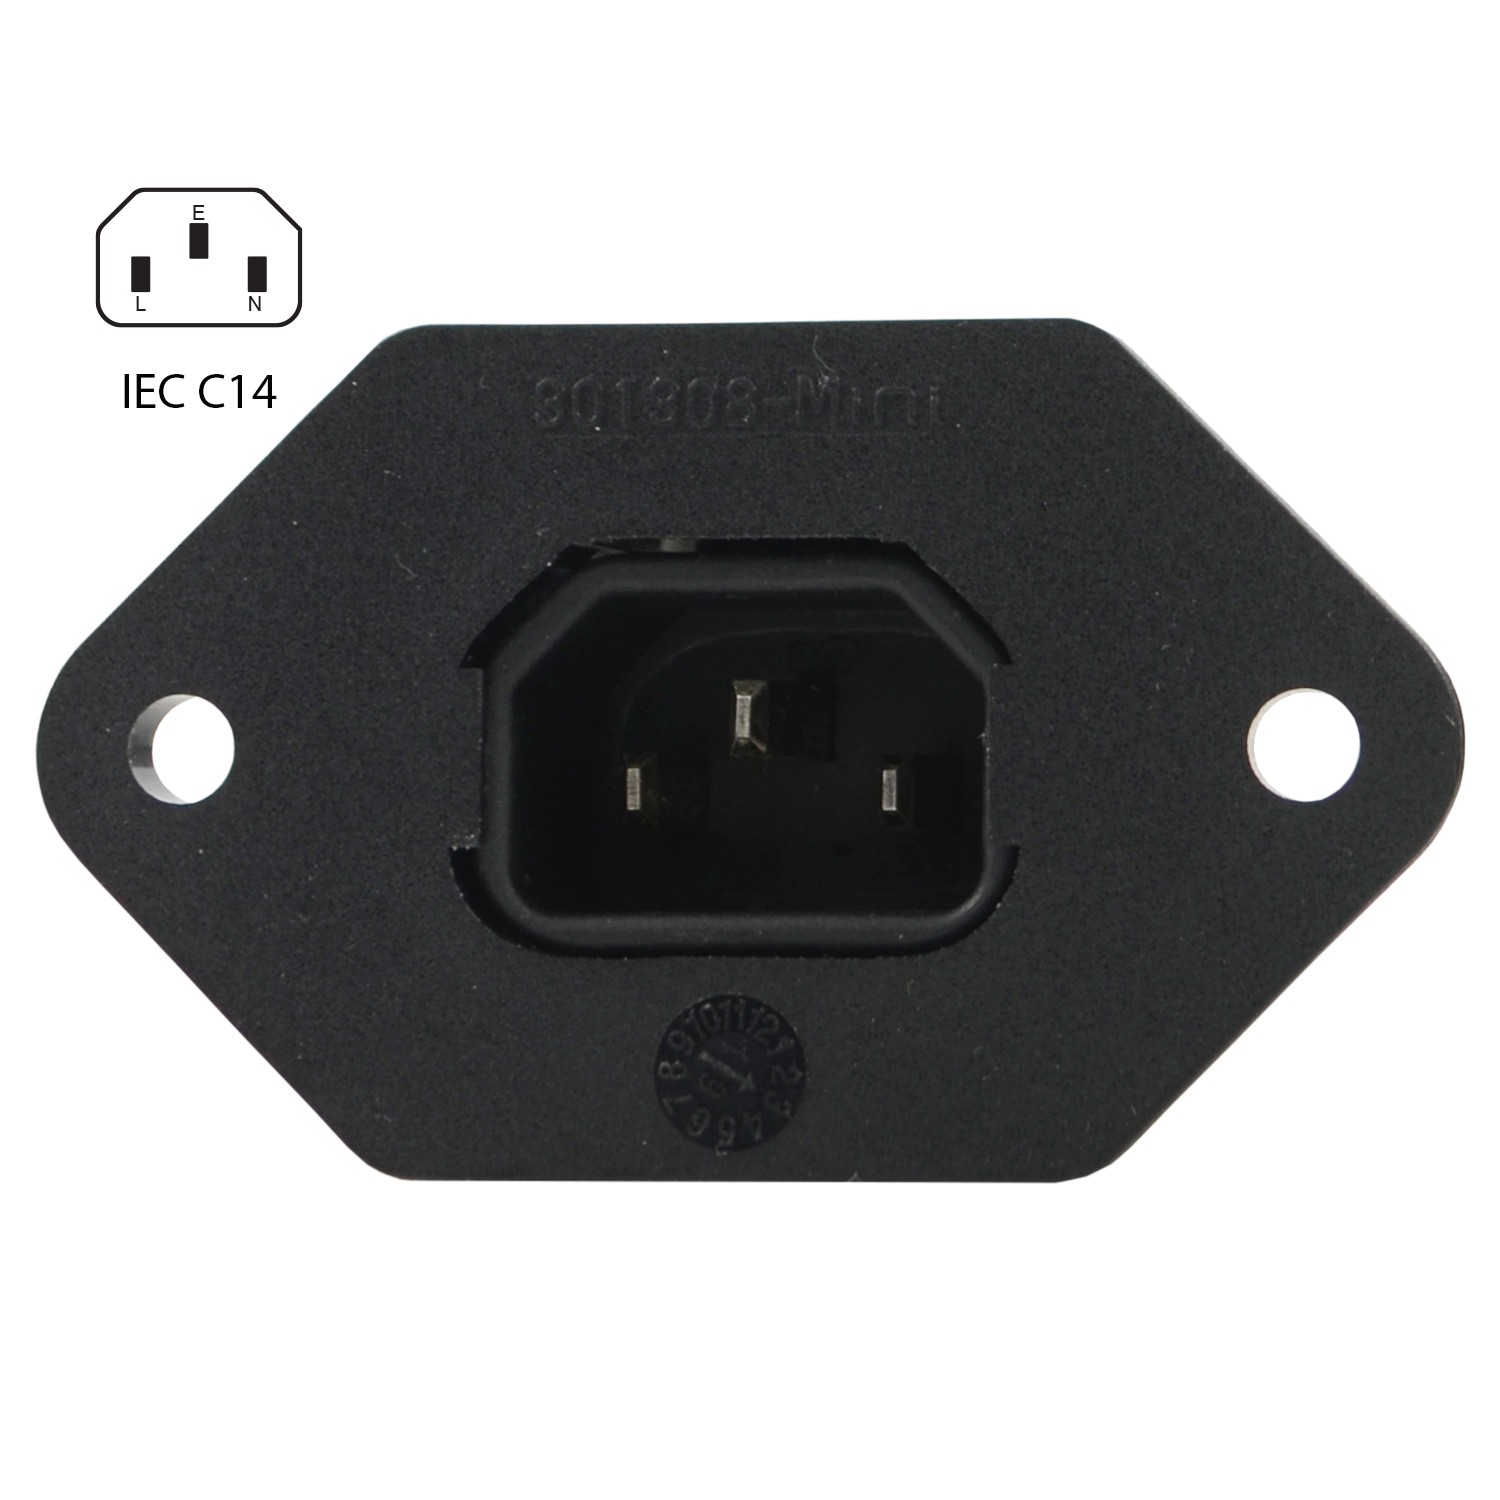 Iec C14 Inlet Pinout C14 to 5 15r Mountable Mini Adapter Of Iec C14 Inlet Pinout